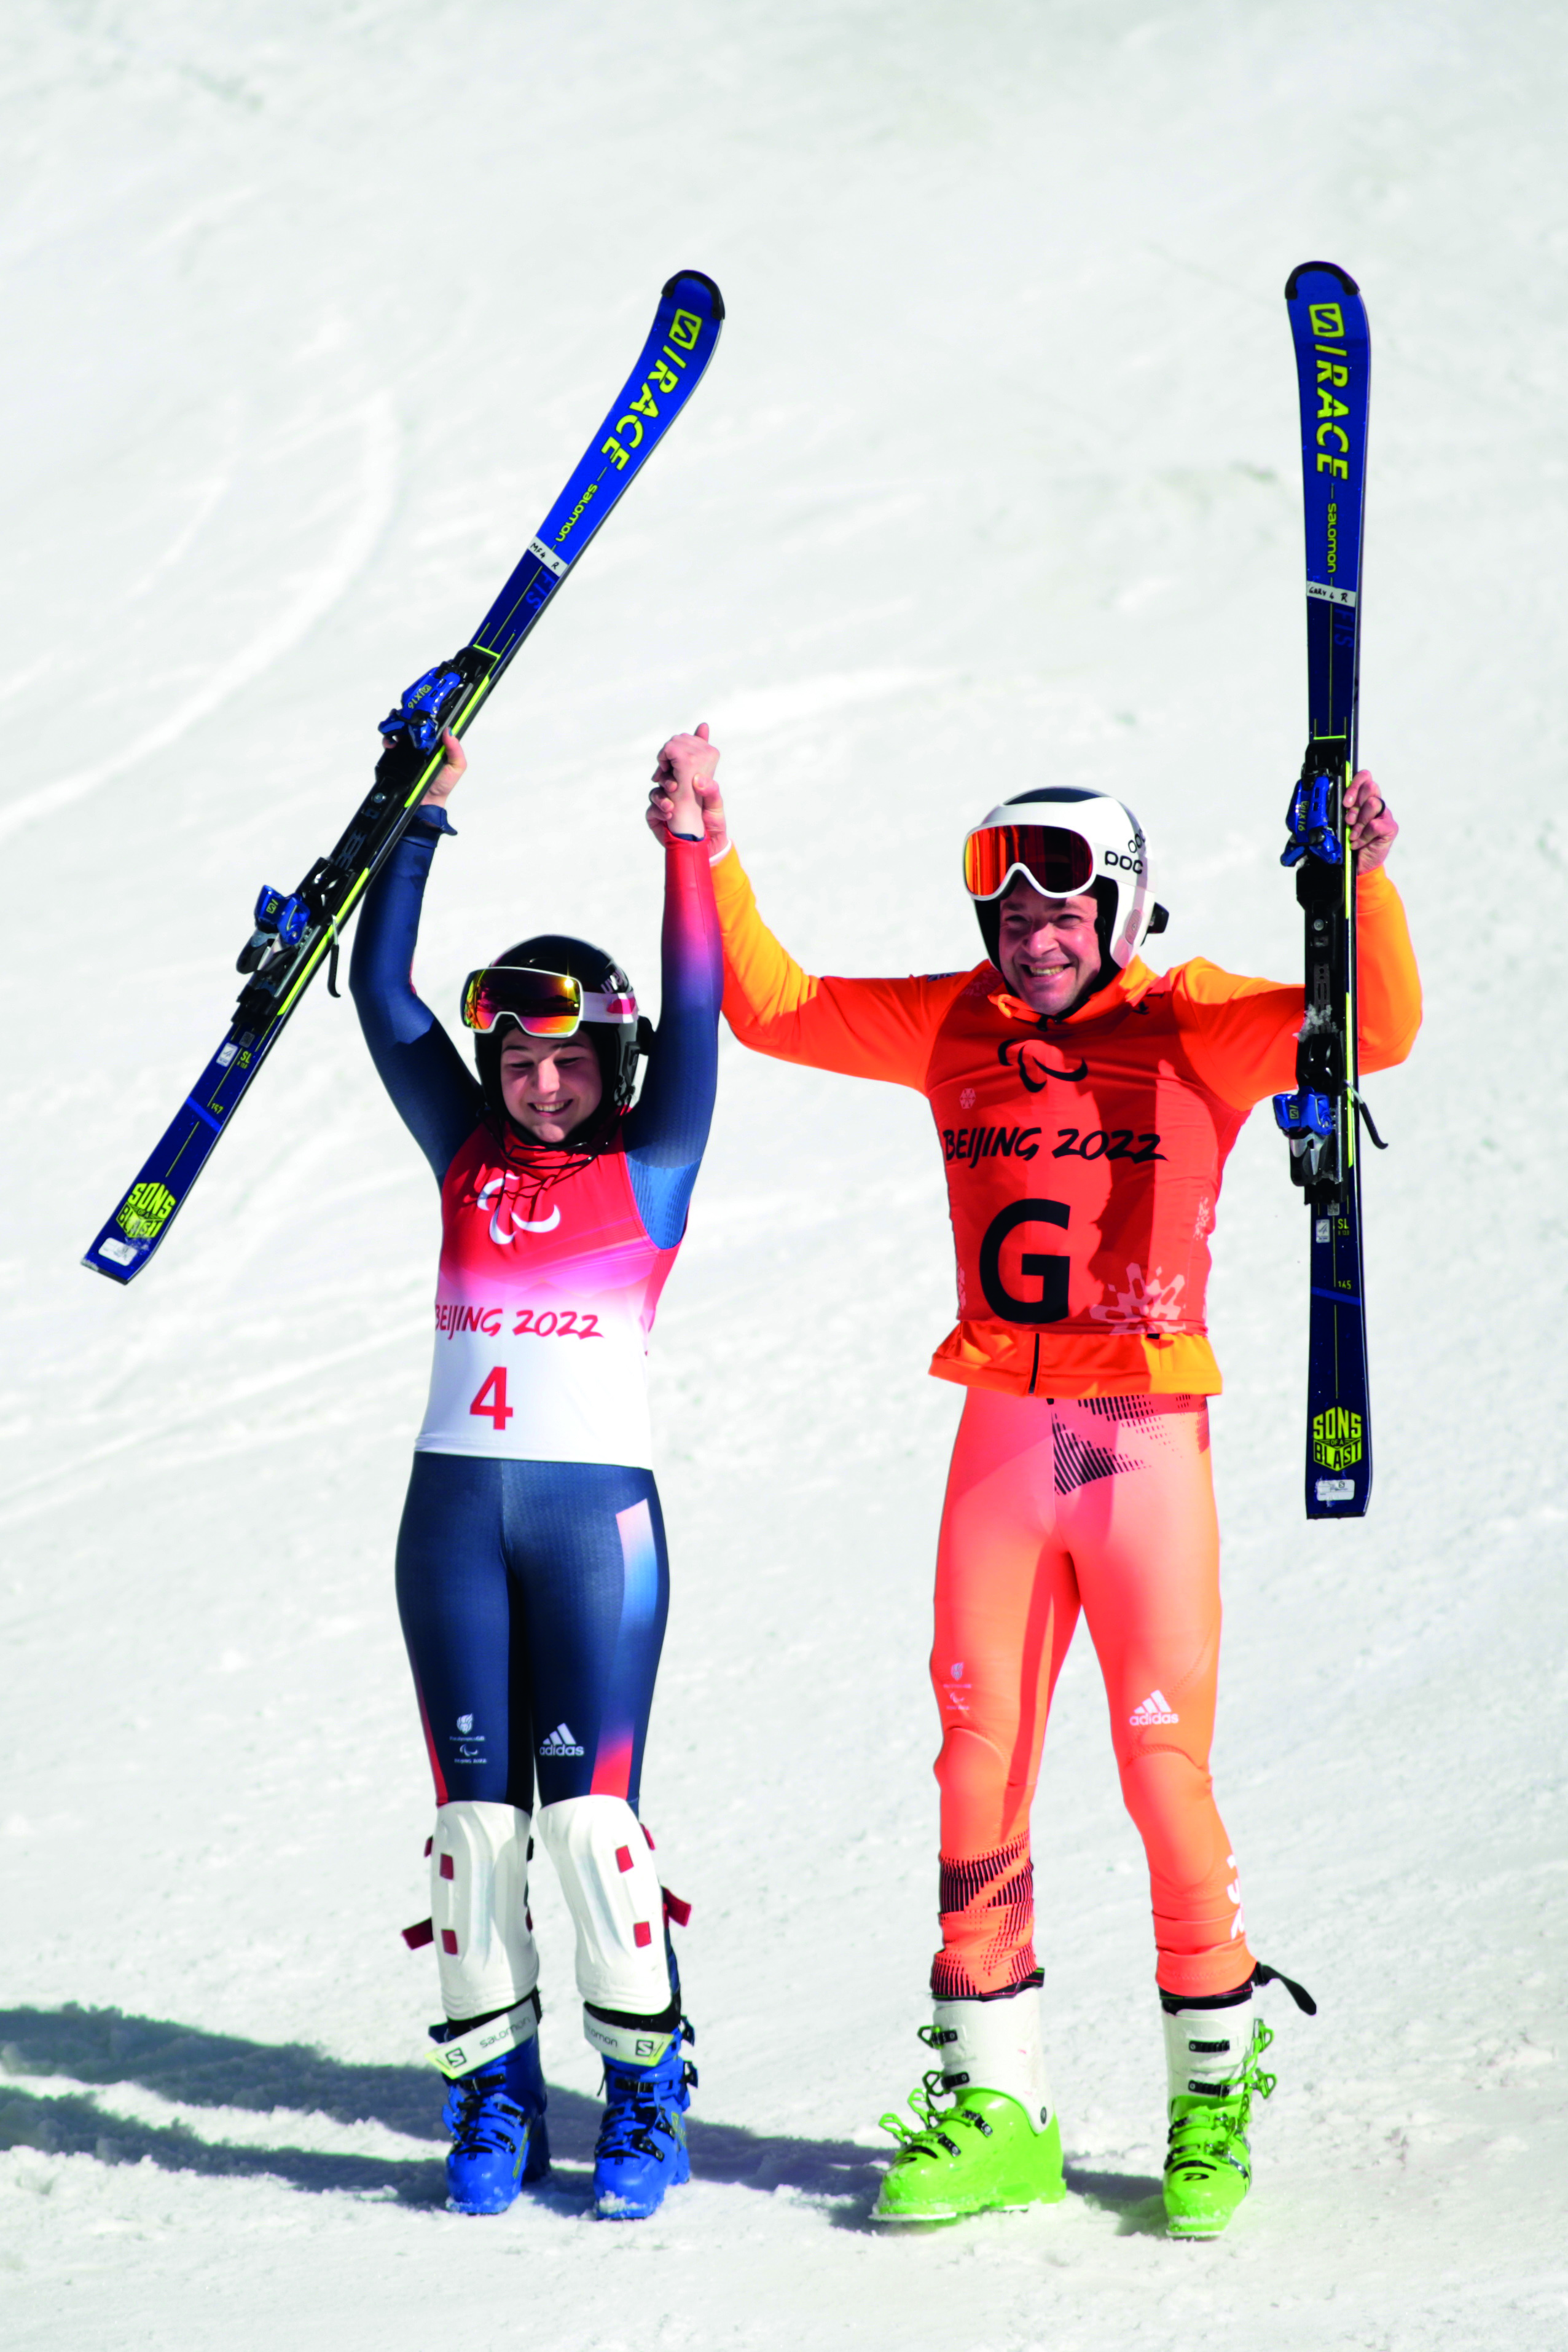 Gary and Menna hold their skis in the air, on the slopes.